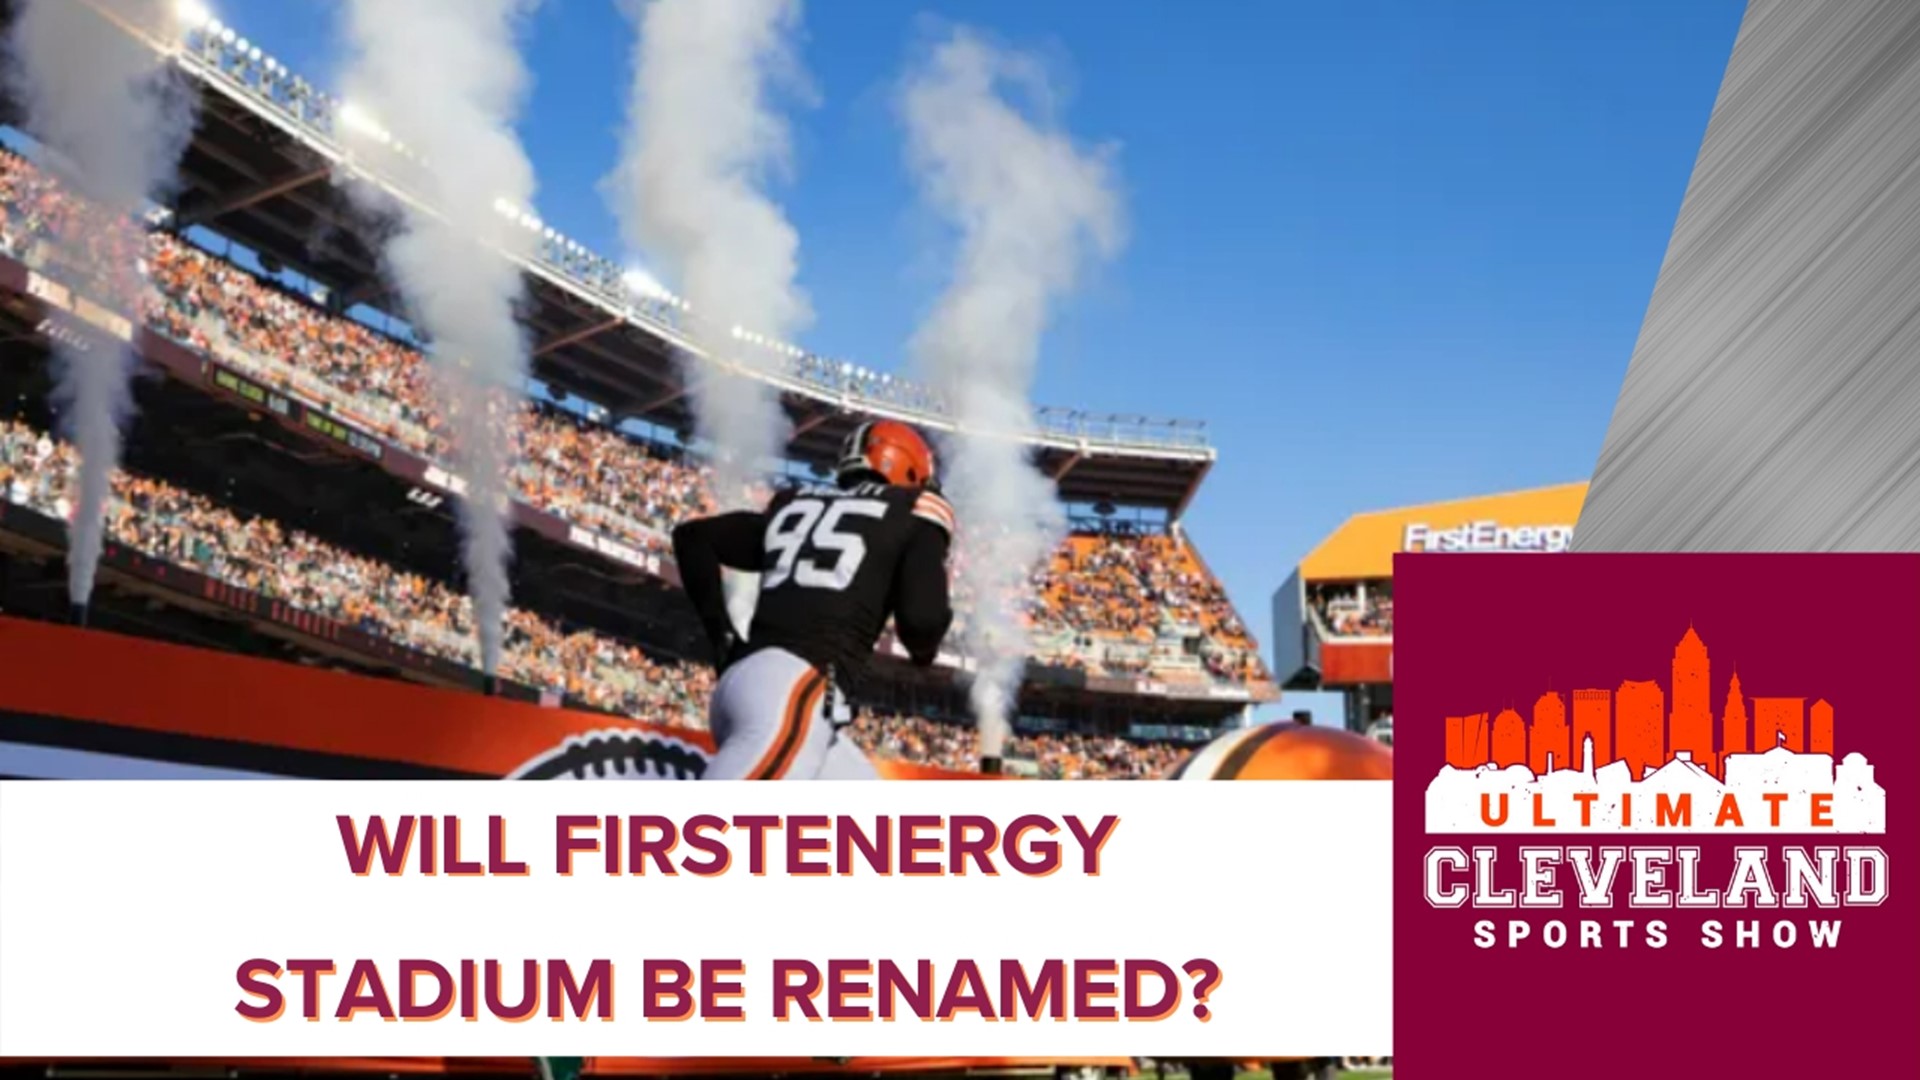 FirstEnergy Stadium is in hot water after Councilman Brian Kazy cites them for the $60M bribery scandal. The UCSS discusses whether this resolution will pass or not.